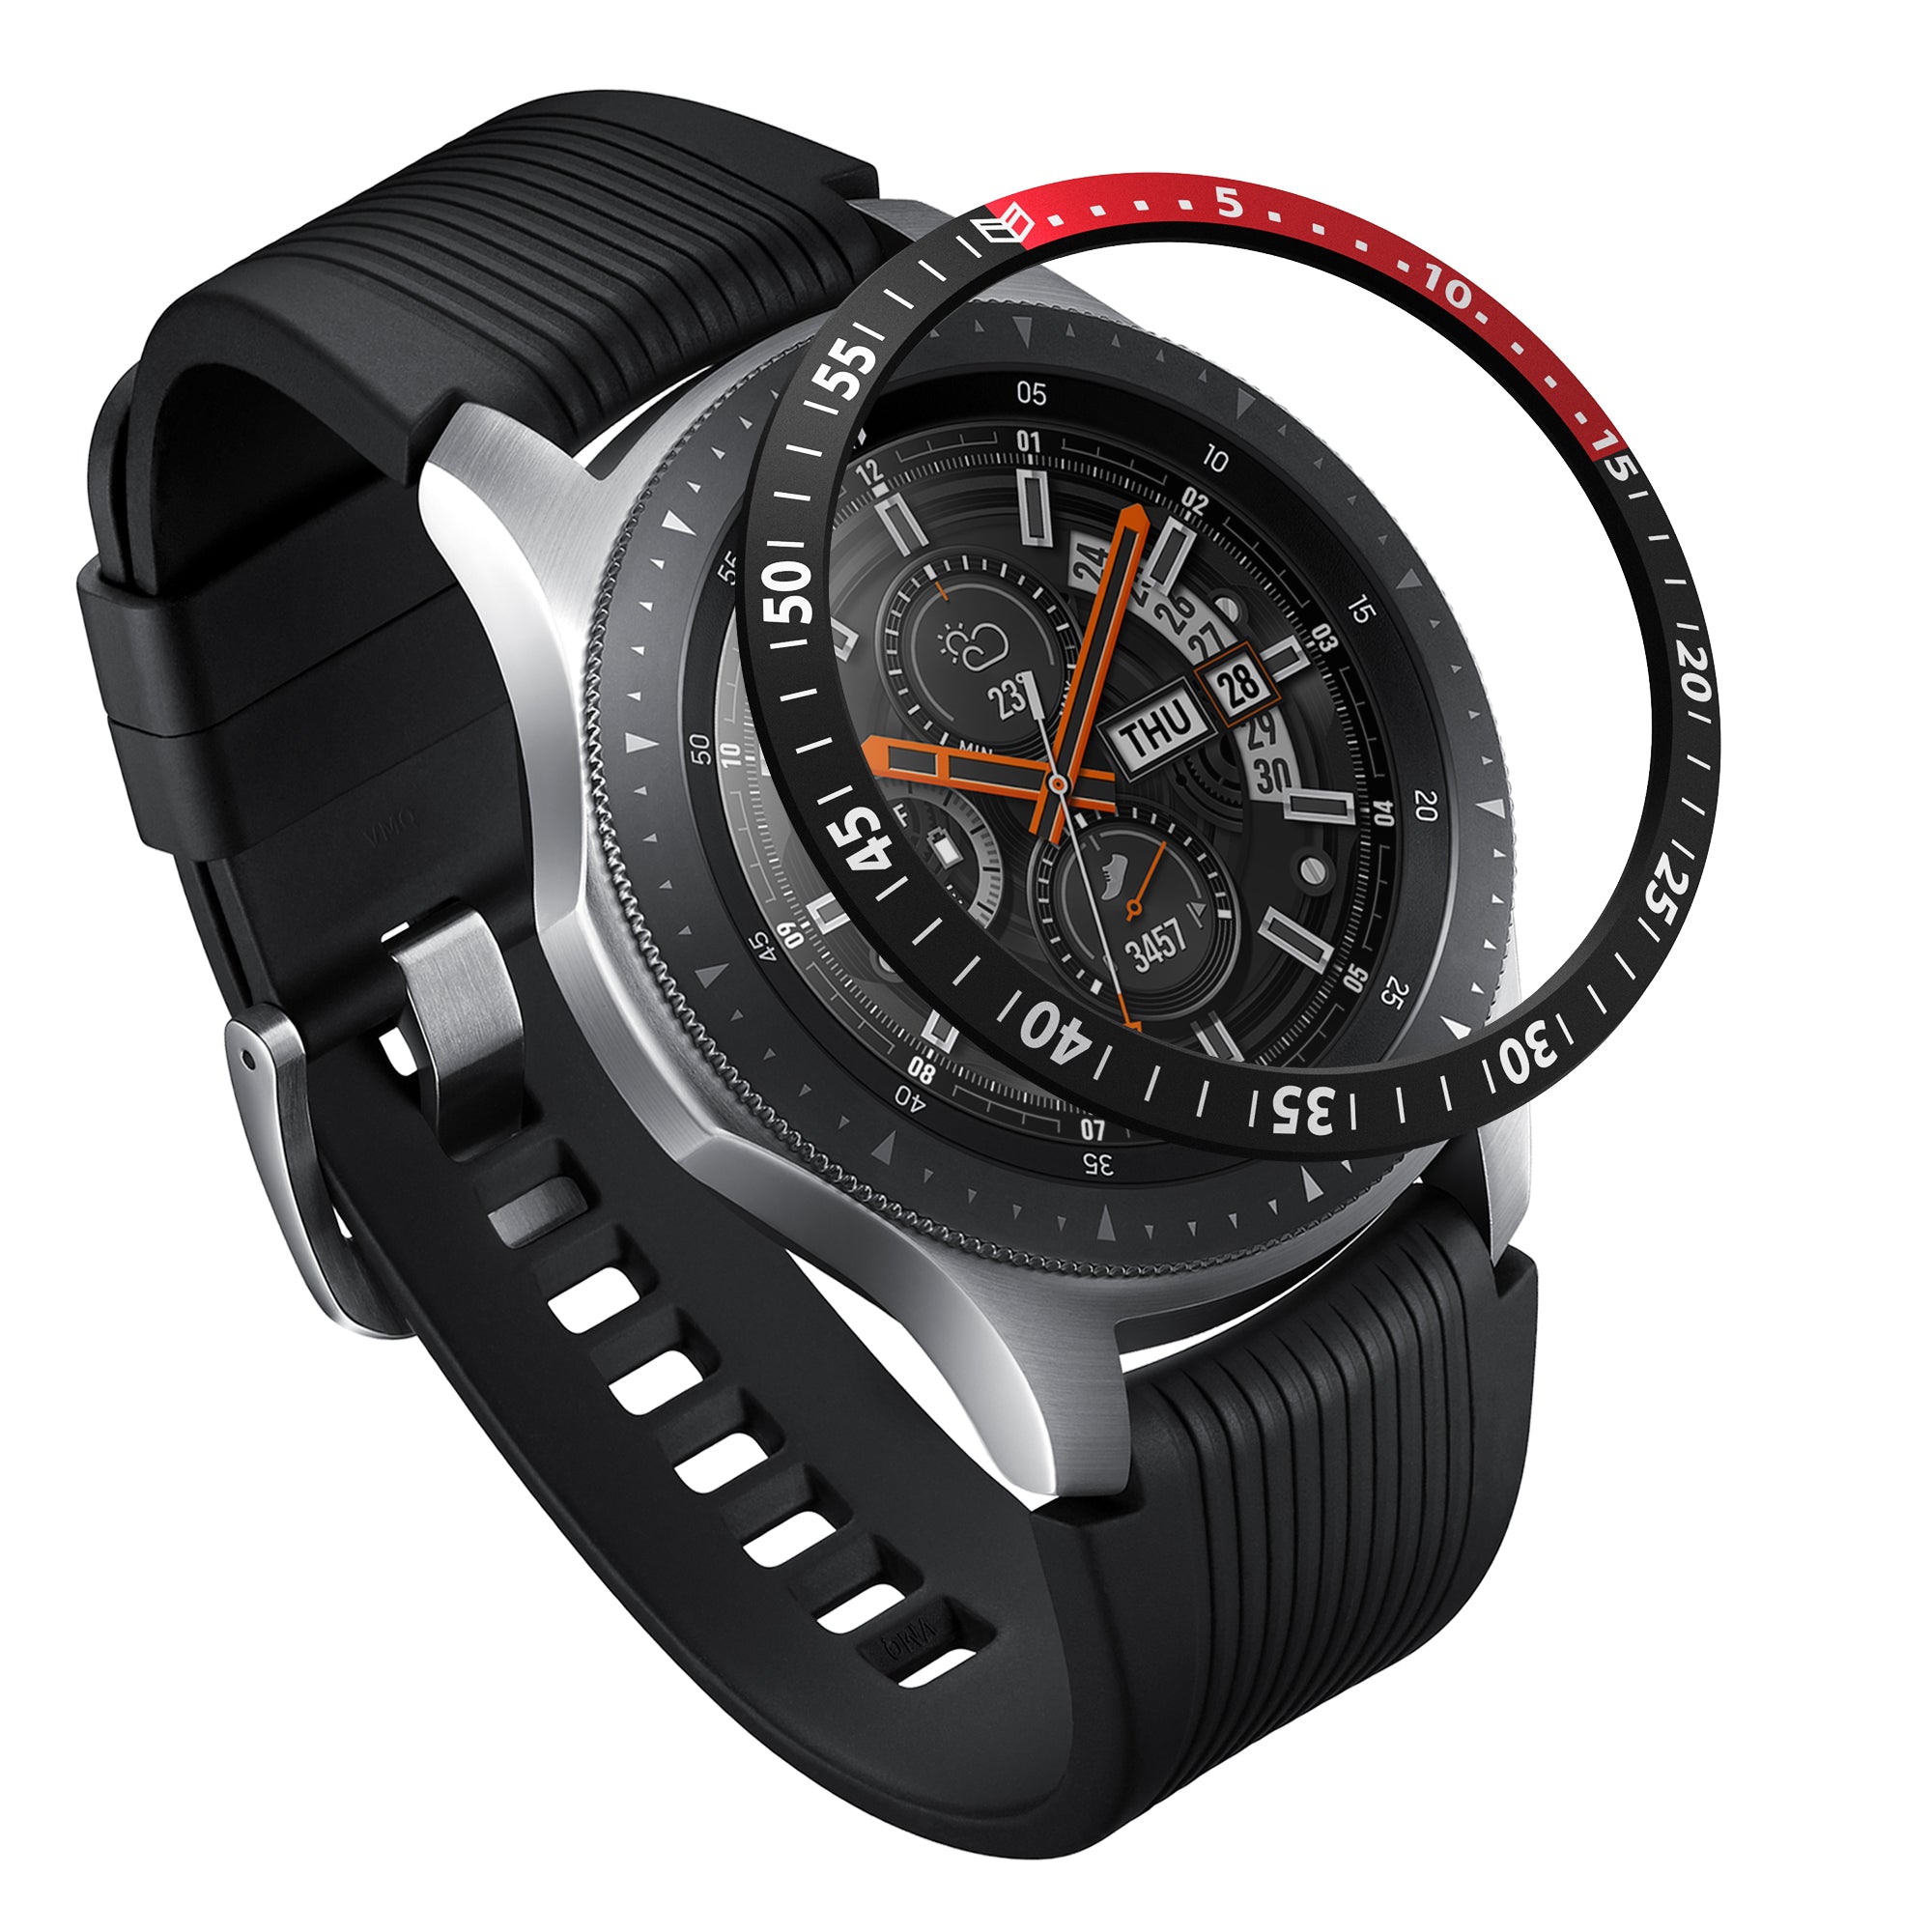 ringke bezel styling for galaxy watch 46mm aluminium black and red